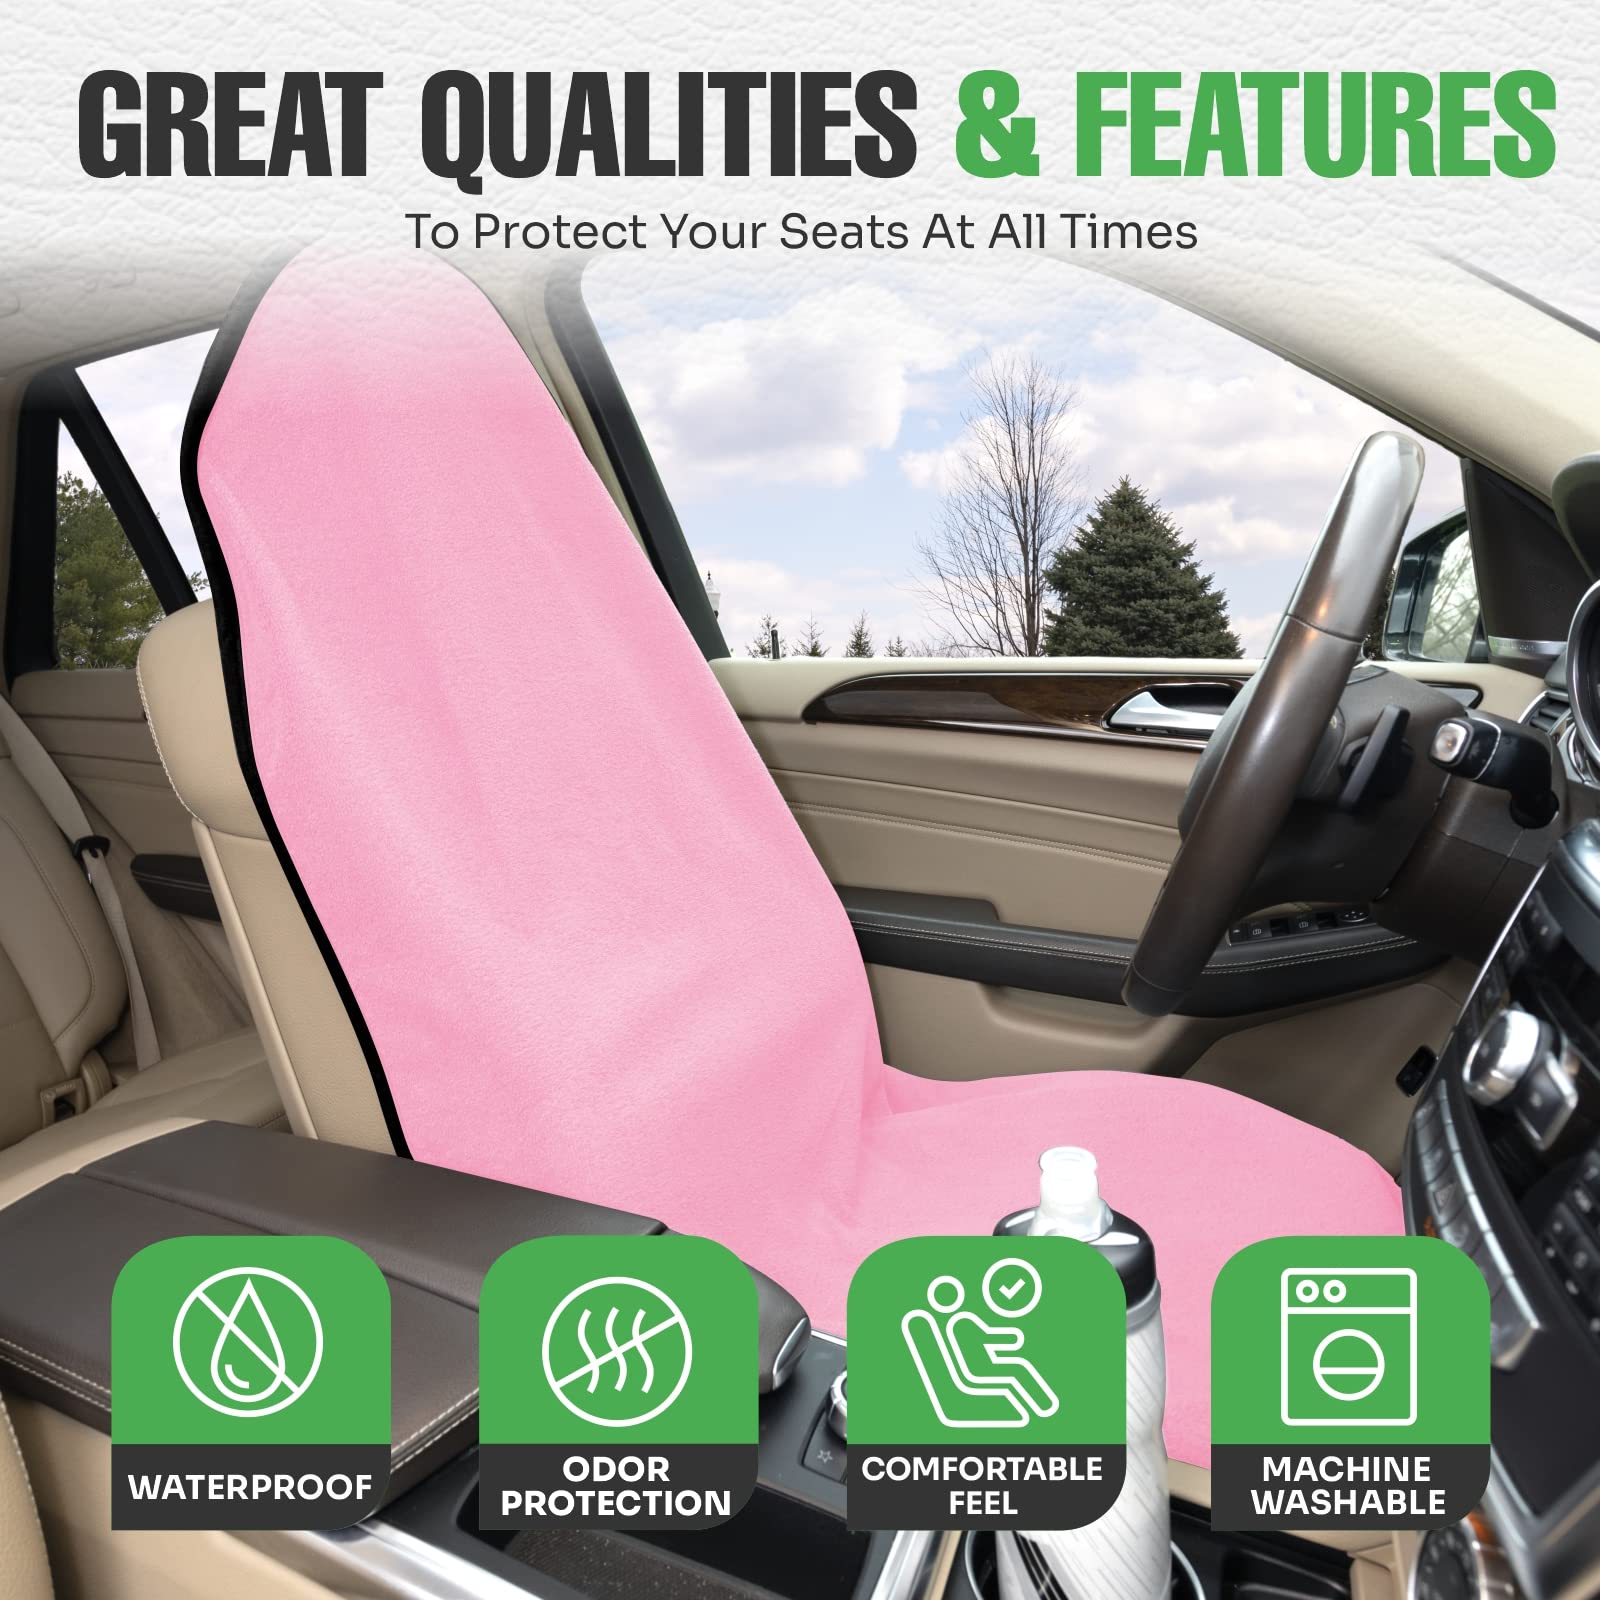 lebogner Waterproof Sweating Car Seat Cover for Post Gym Workout， Running， Swimming， Beach and Hiking， Universal Fit Anti-Slip Bucket Seat Protector for Cars， SUVs and Trucks， Machine Washable， Pink